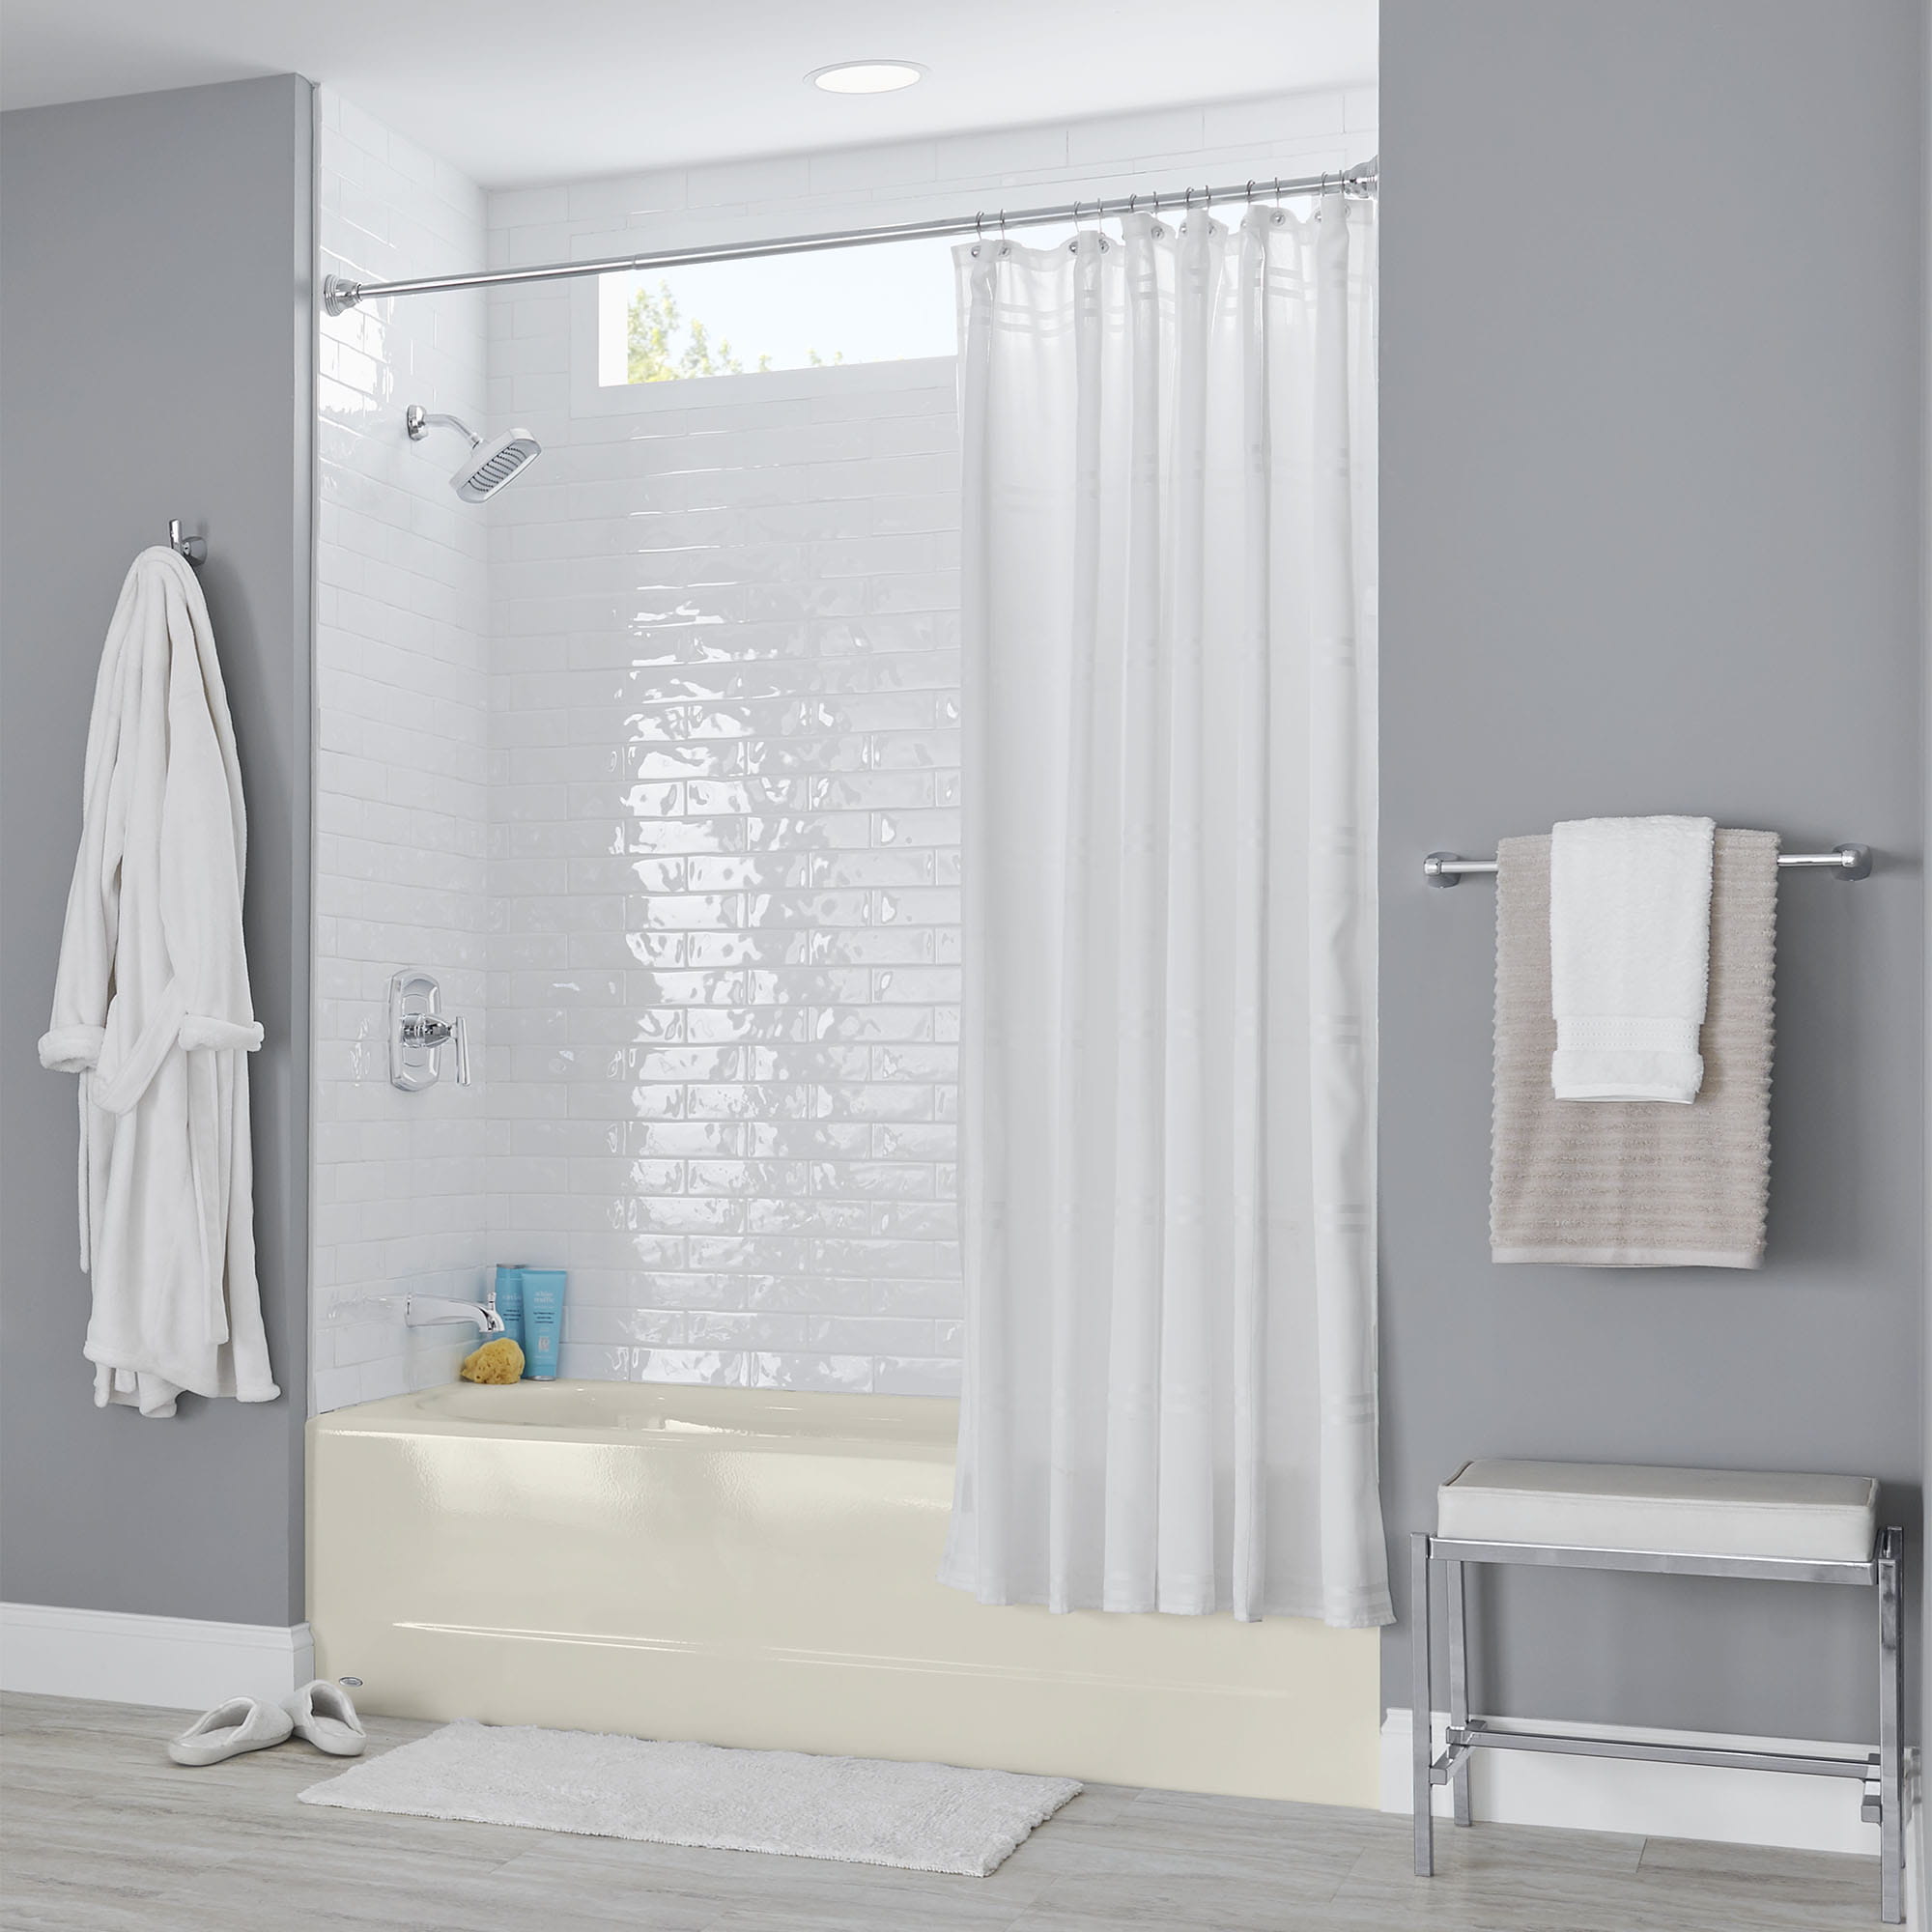 Princeton Americast 60 x 30 Inch Integral Apron Bathtub With Left Hand Outlet LINEN